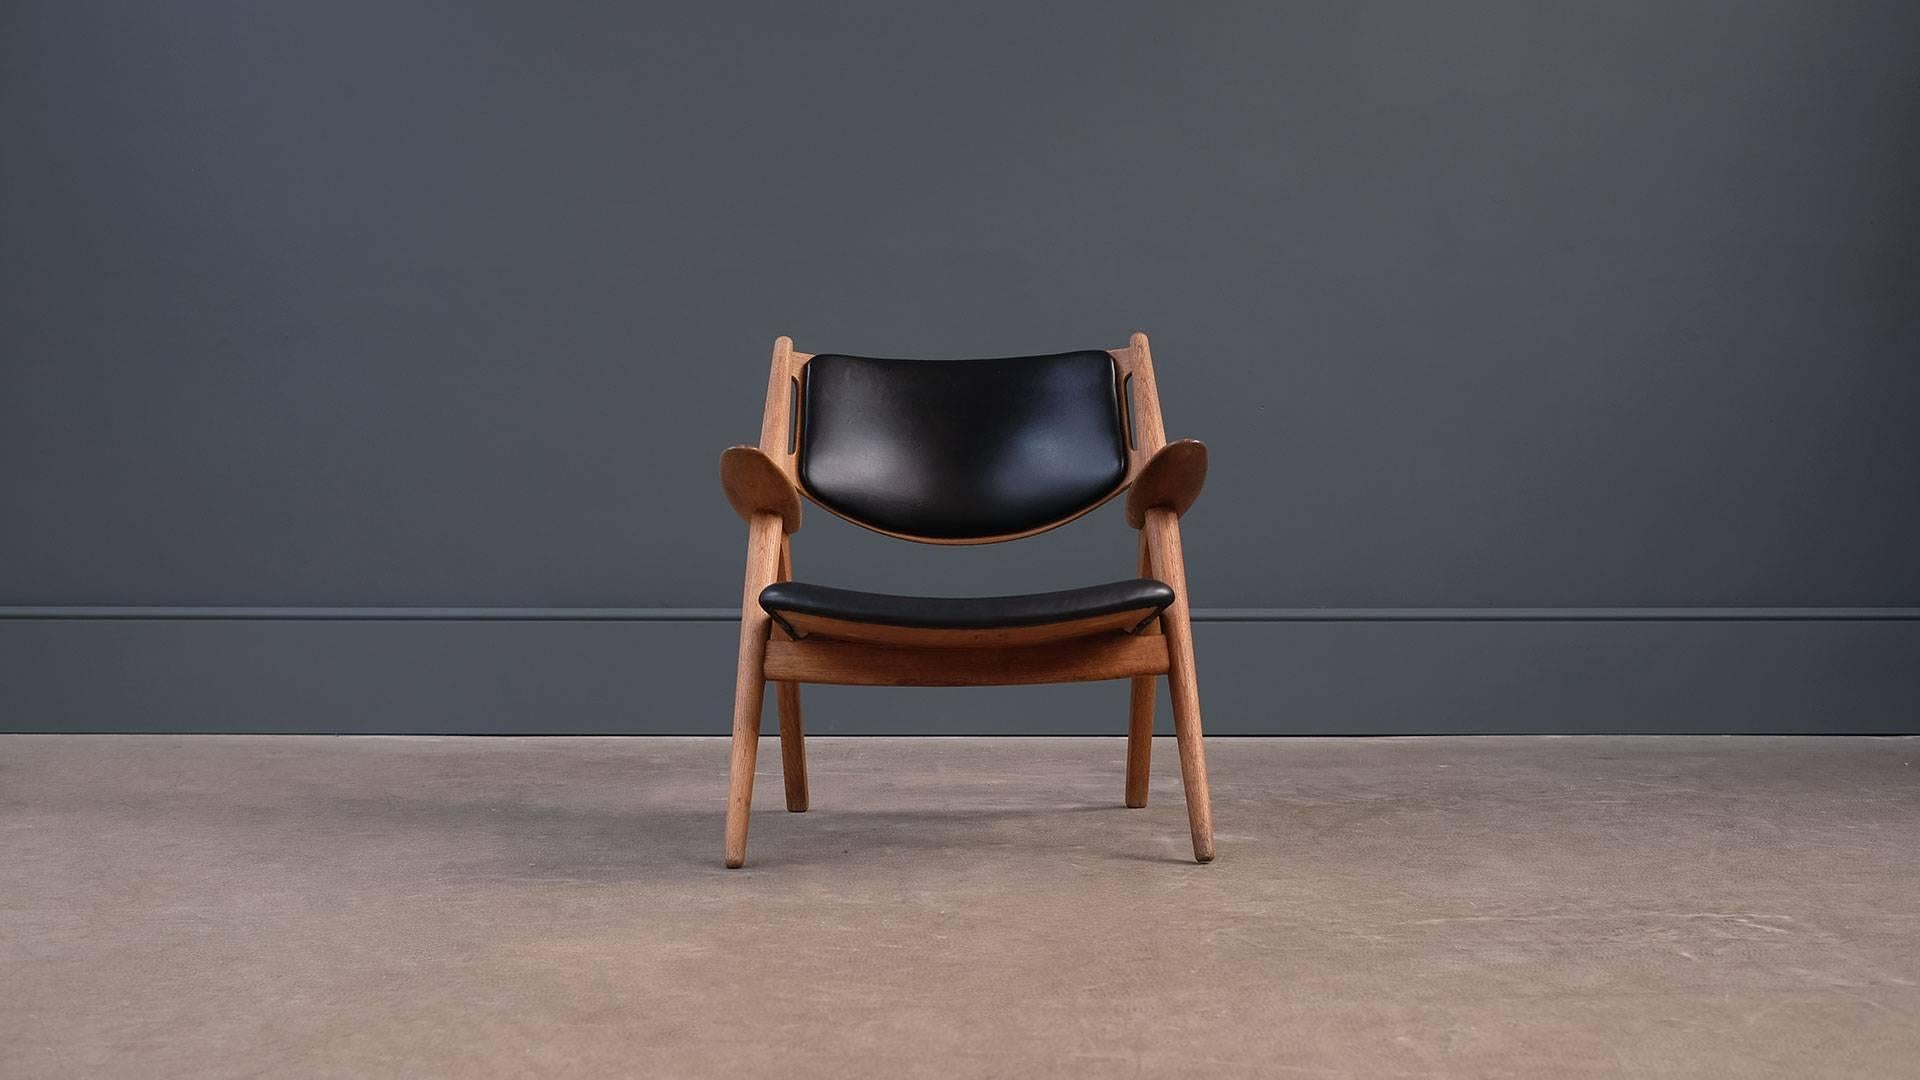 Amazing first production CH28 or Sawback lounge chair designed by Hans Wegner for Carl Hansen, Denmark. Early chair in oak with beautiful black leather. Superb grain detail.